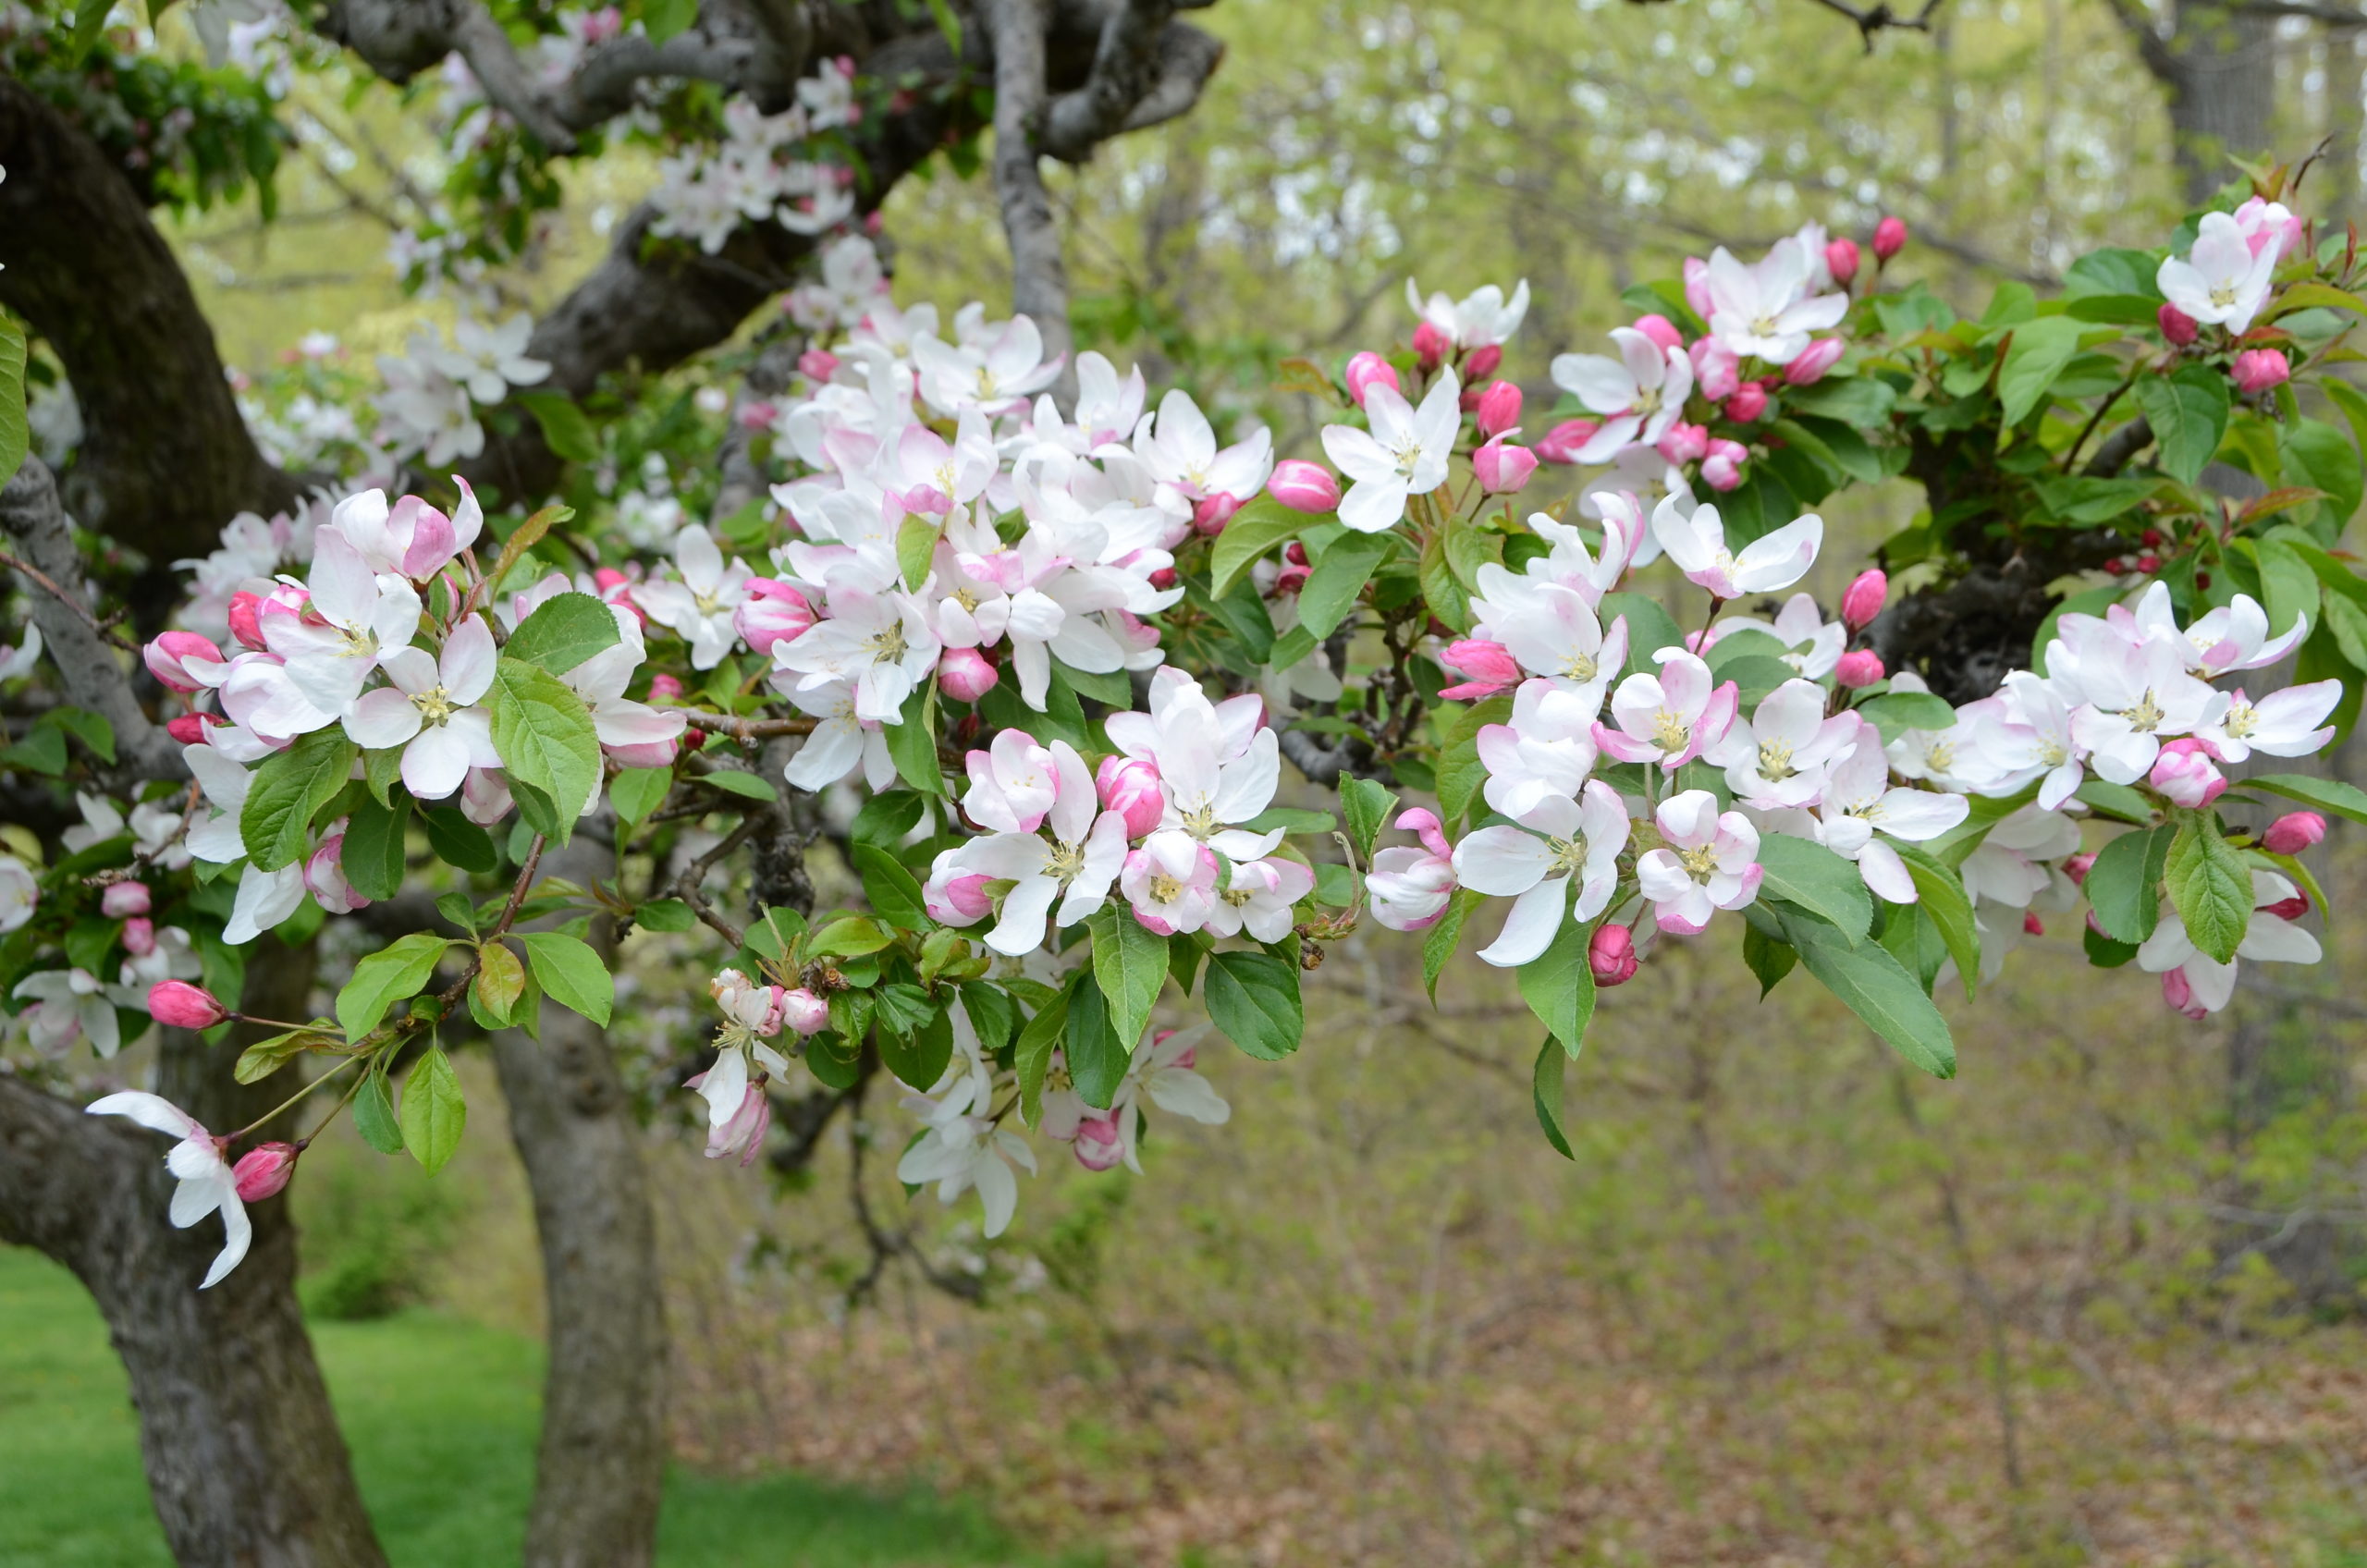 Apple and crabapple cuttings offer both mildly scented flowers and a range of colors. The widest range of colors come from the crabapple group. Long year-old stems cut for shaping and controlling fruiting on standard apple trees are great for forcing.